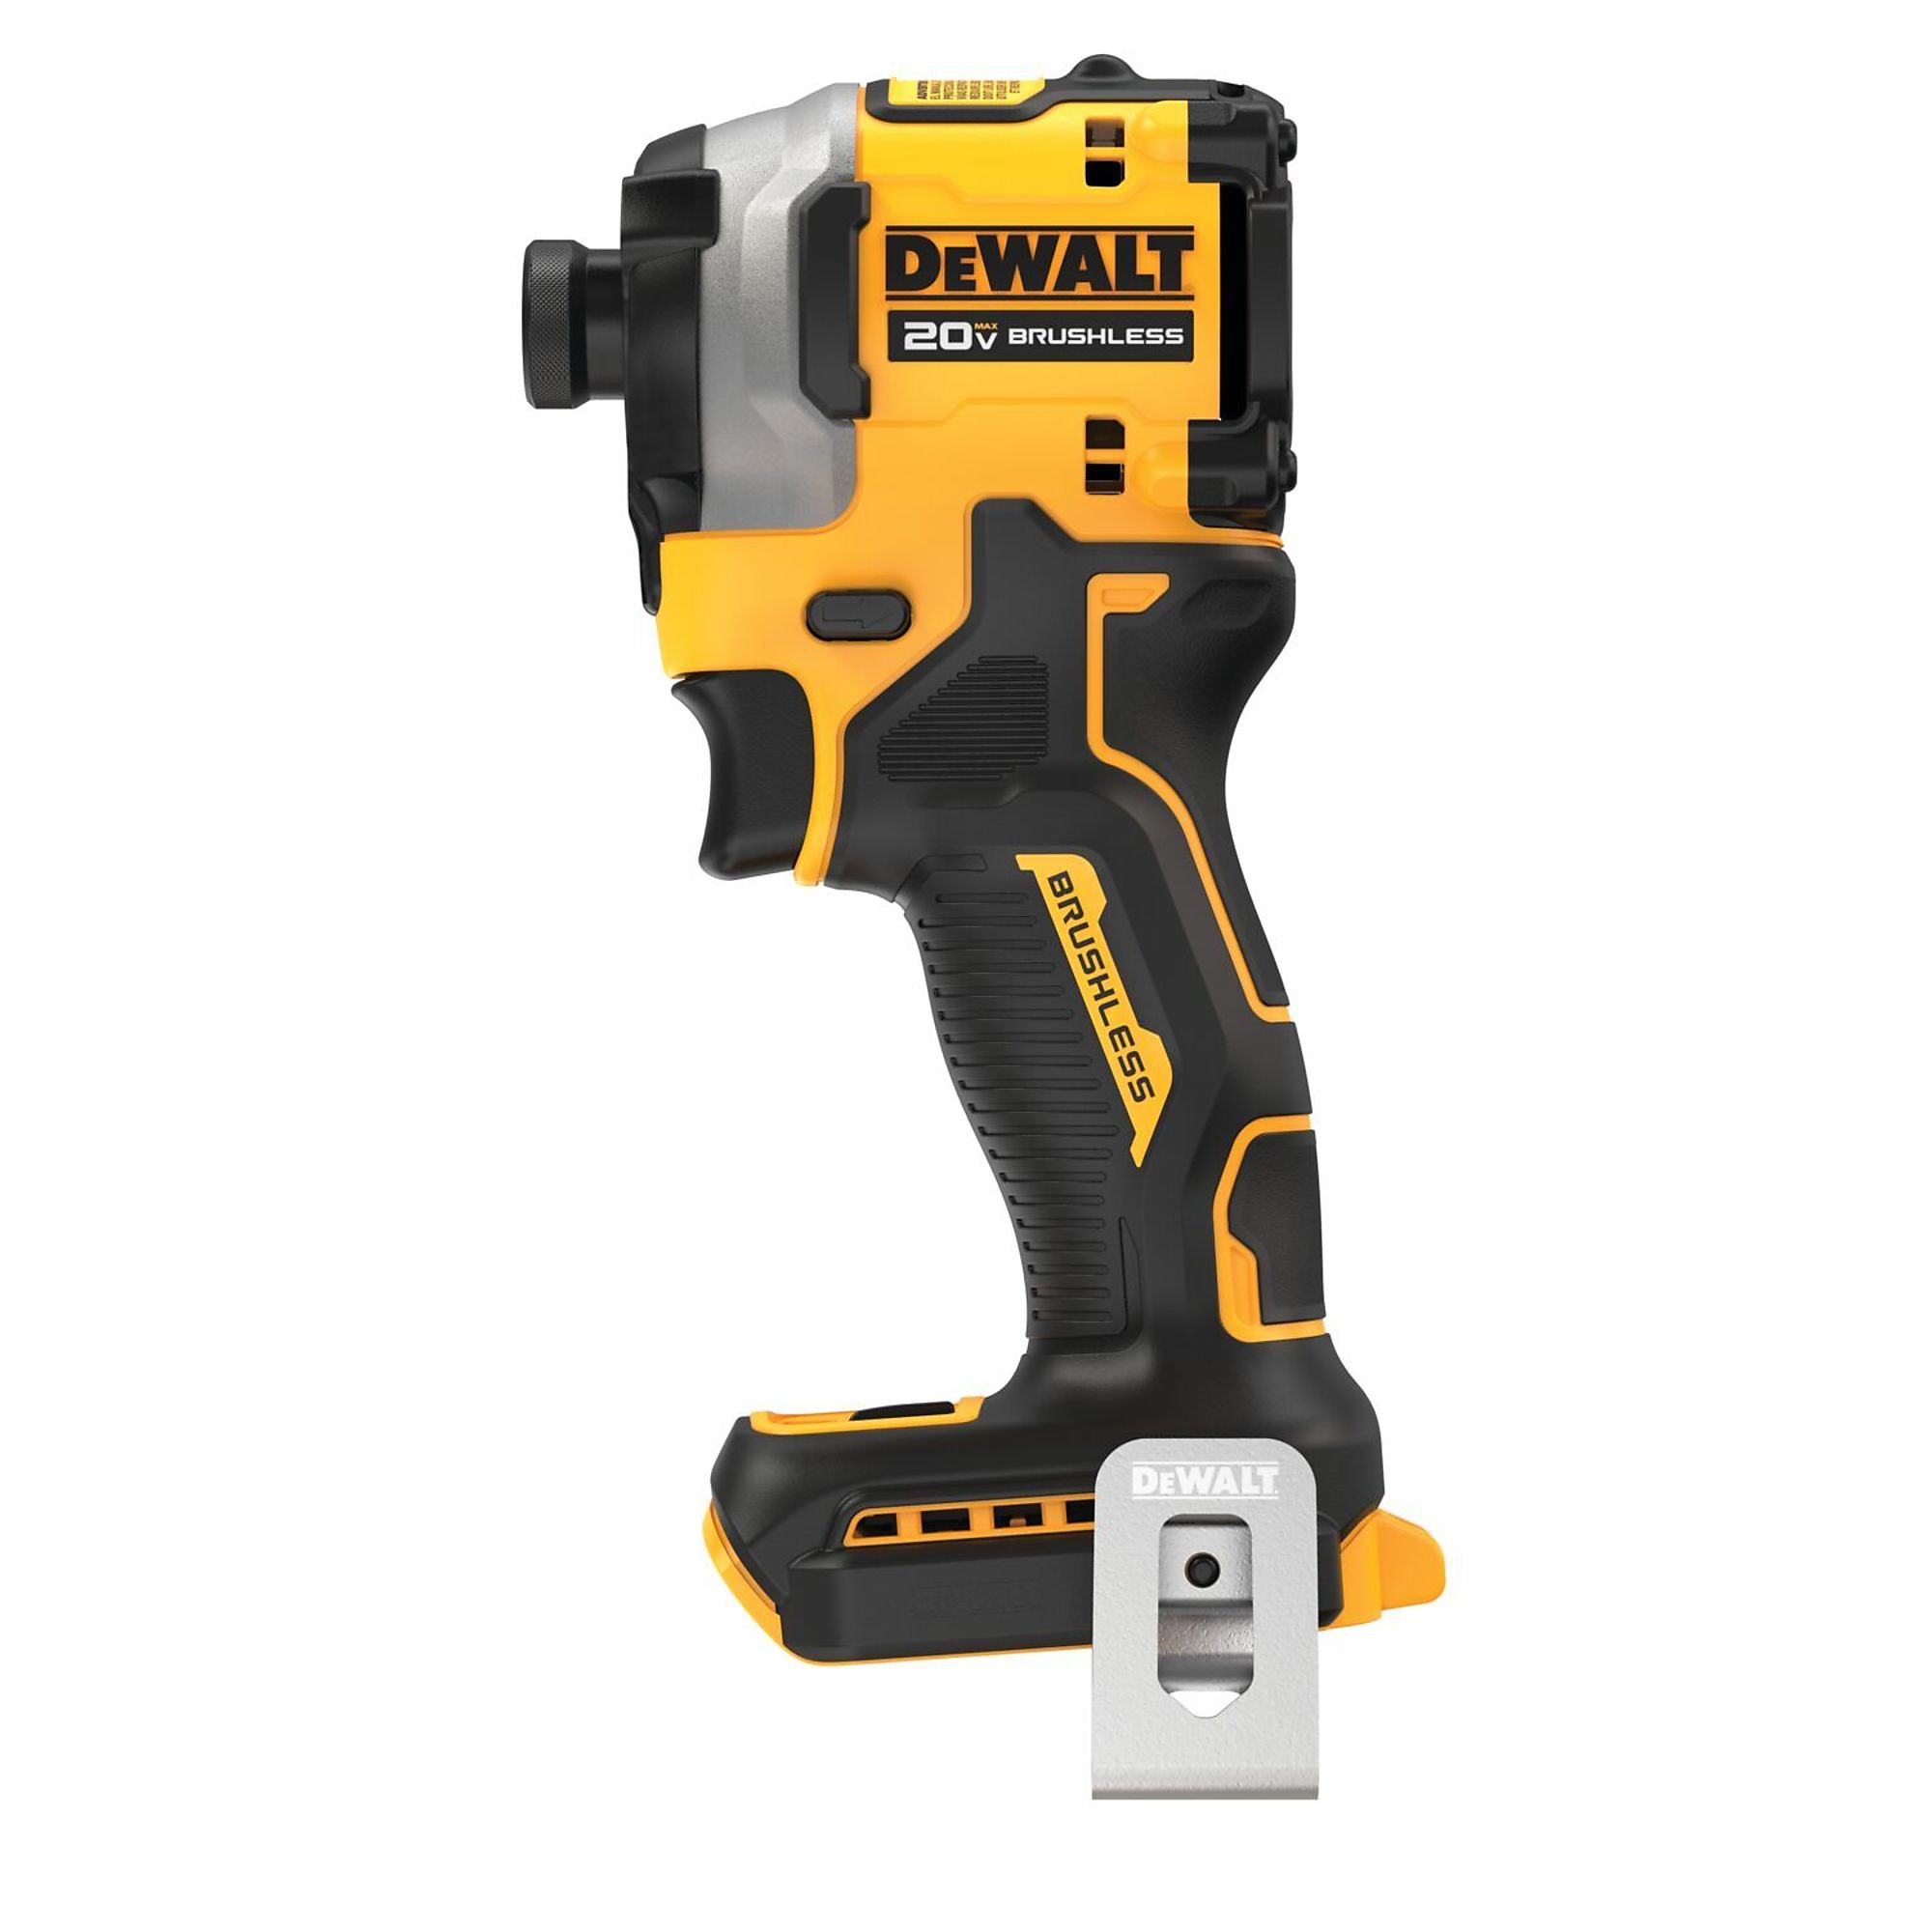 20V MAX* XR® 3-Speed 1/4 in. Impact Driver Kit